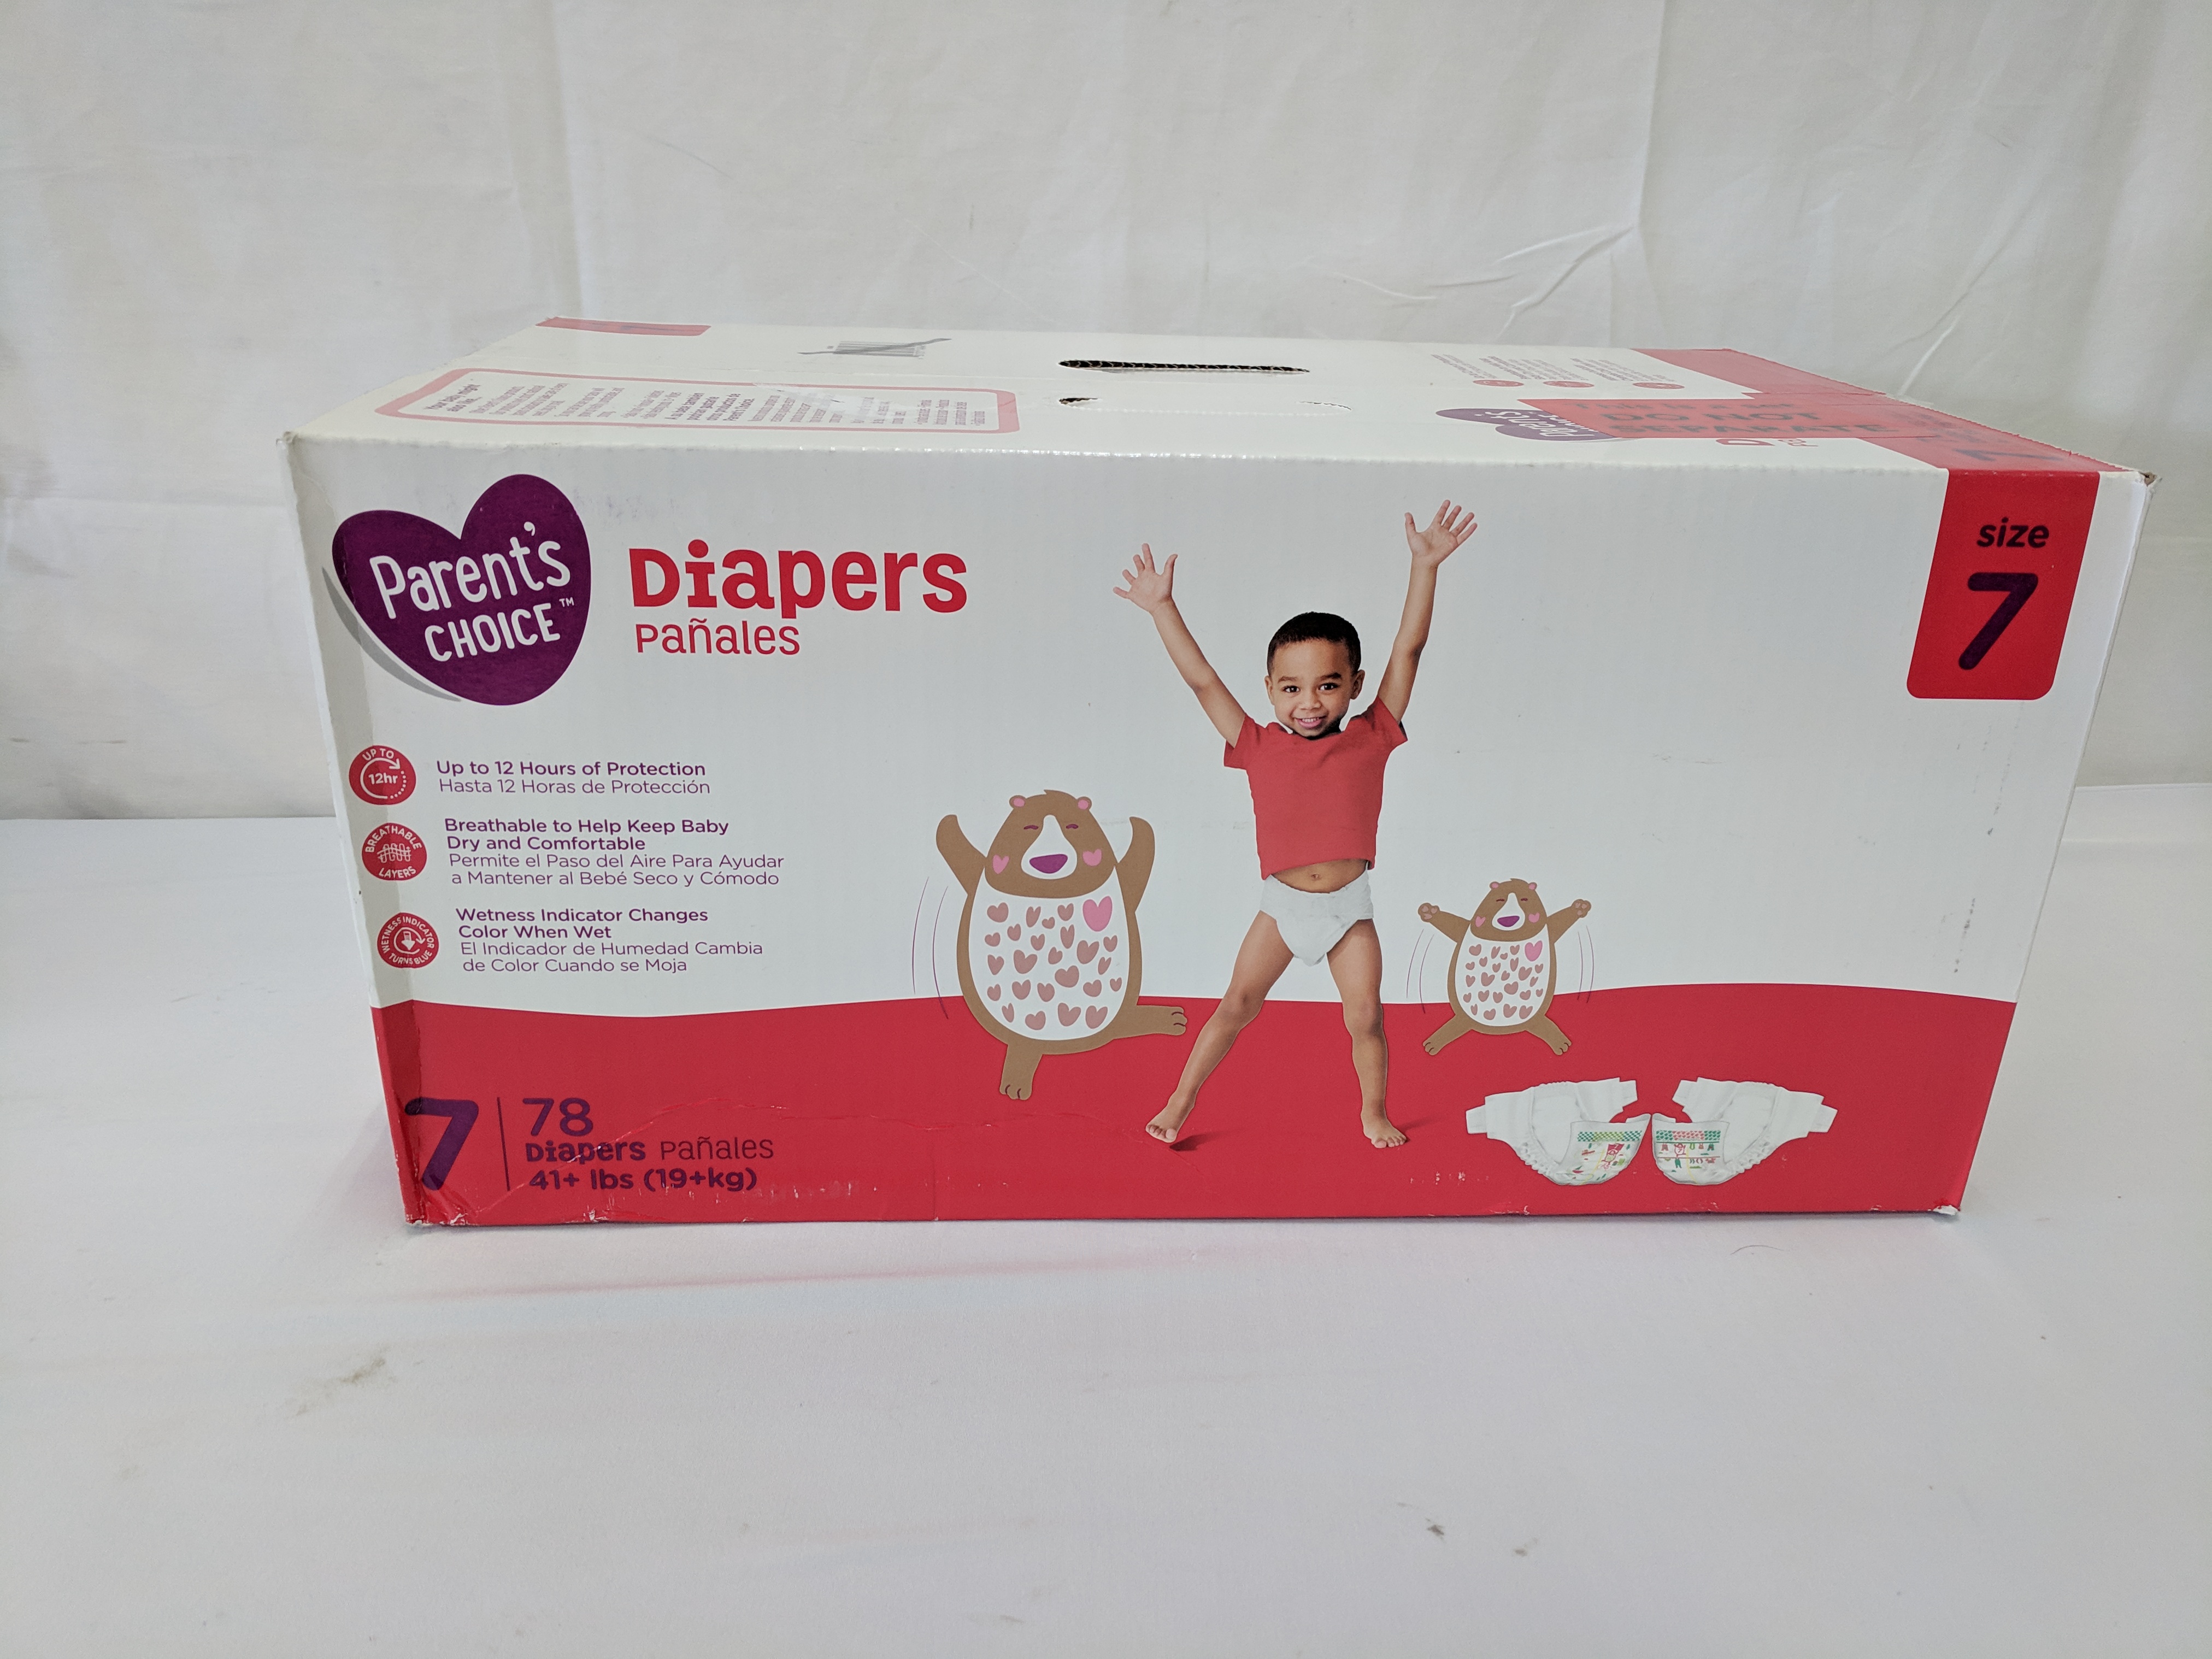 Diapers size 7, qty 78, Parent's Choice, Sealed